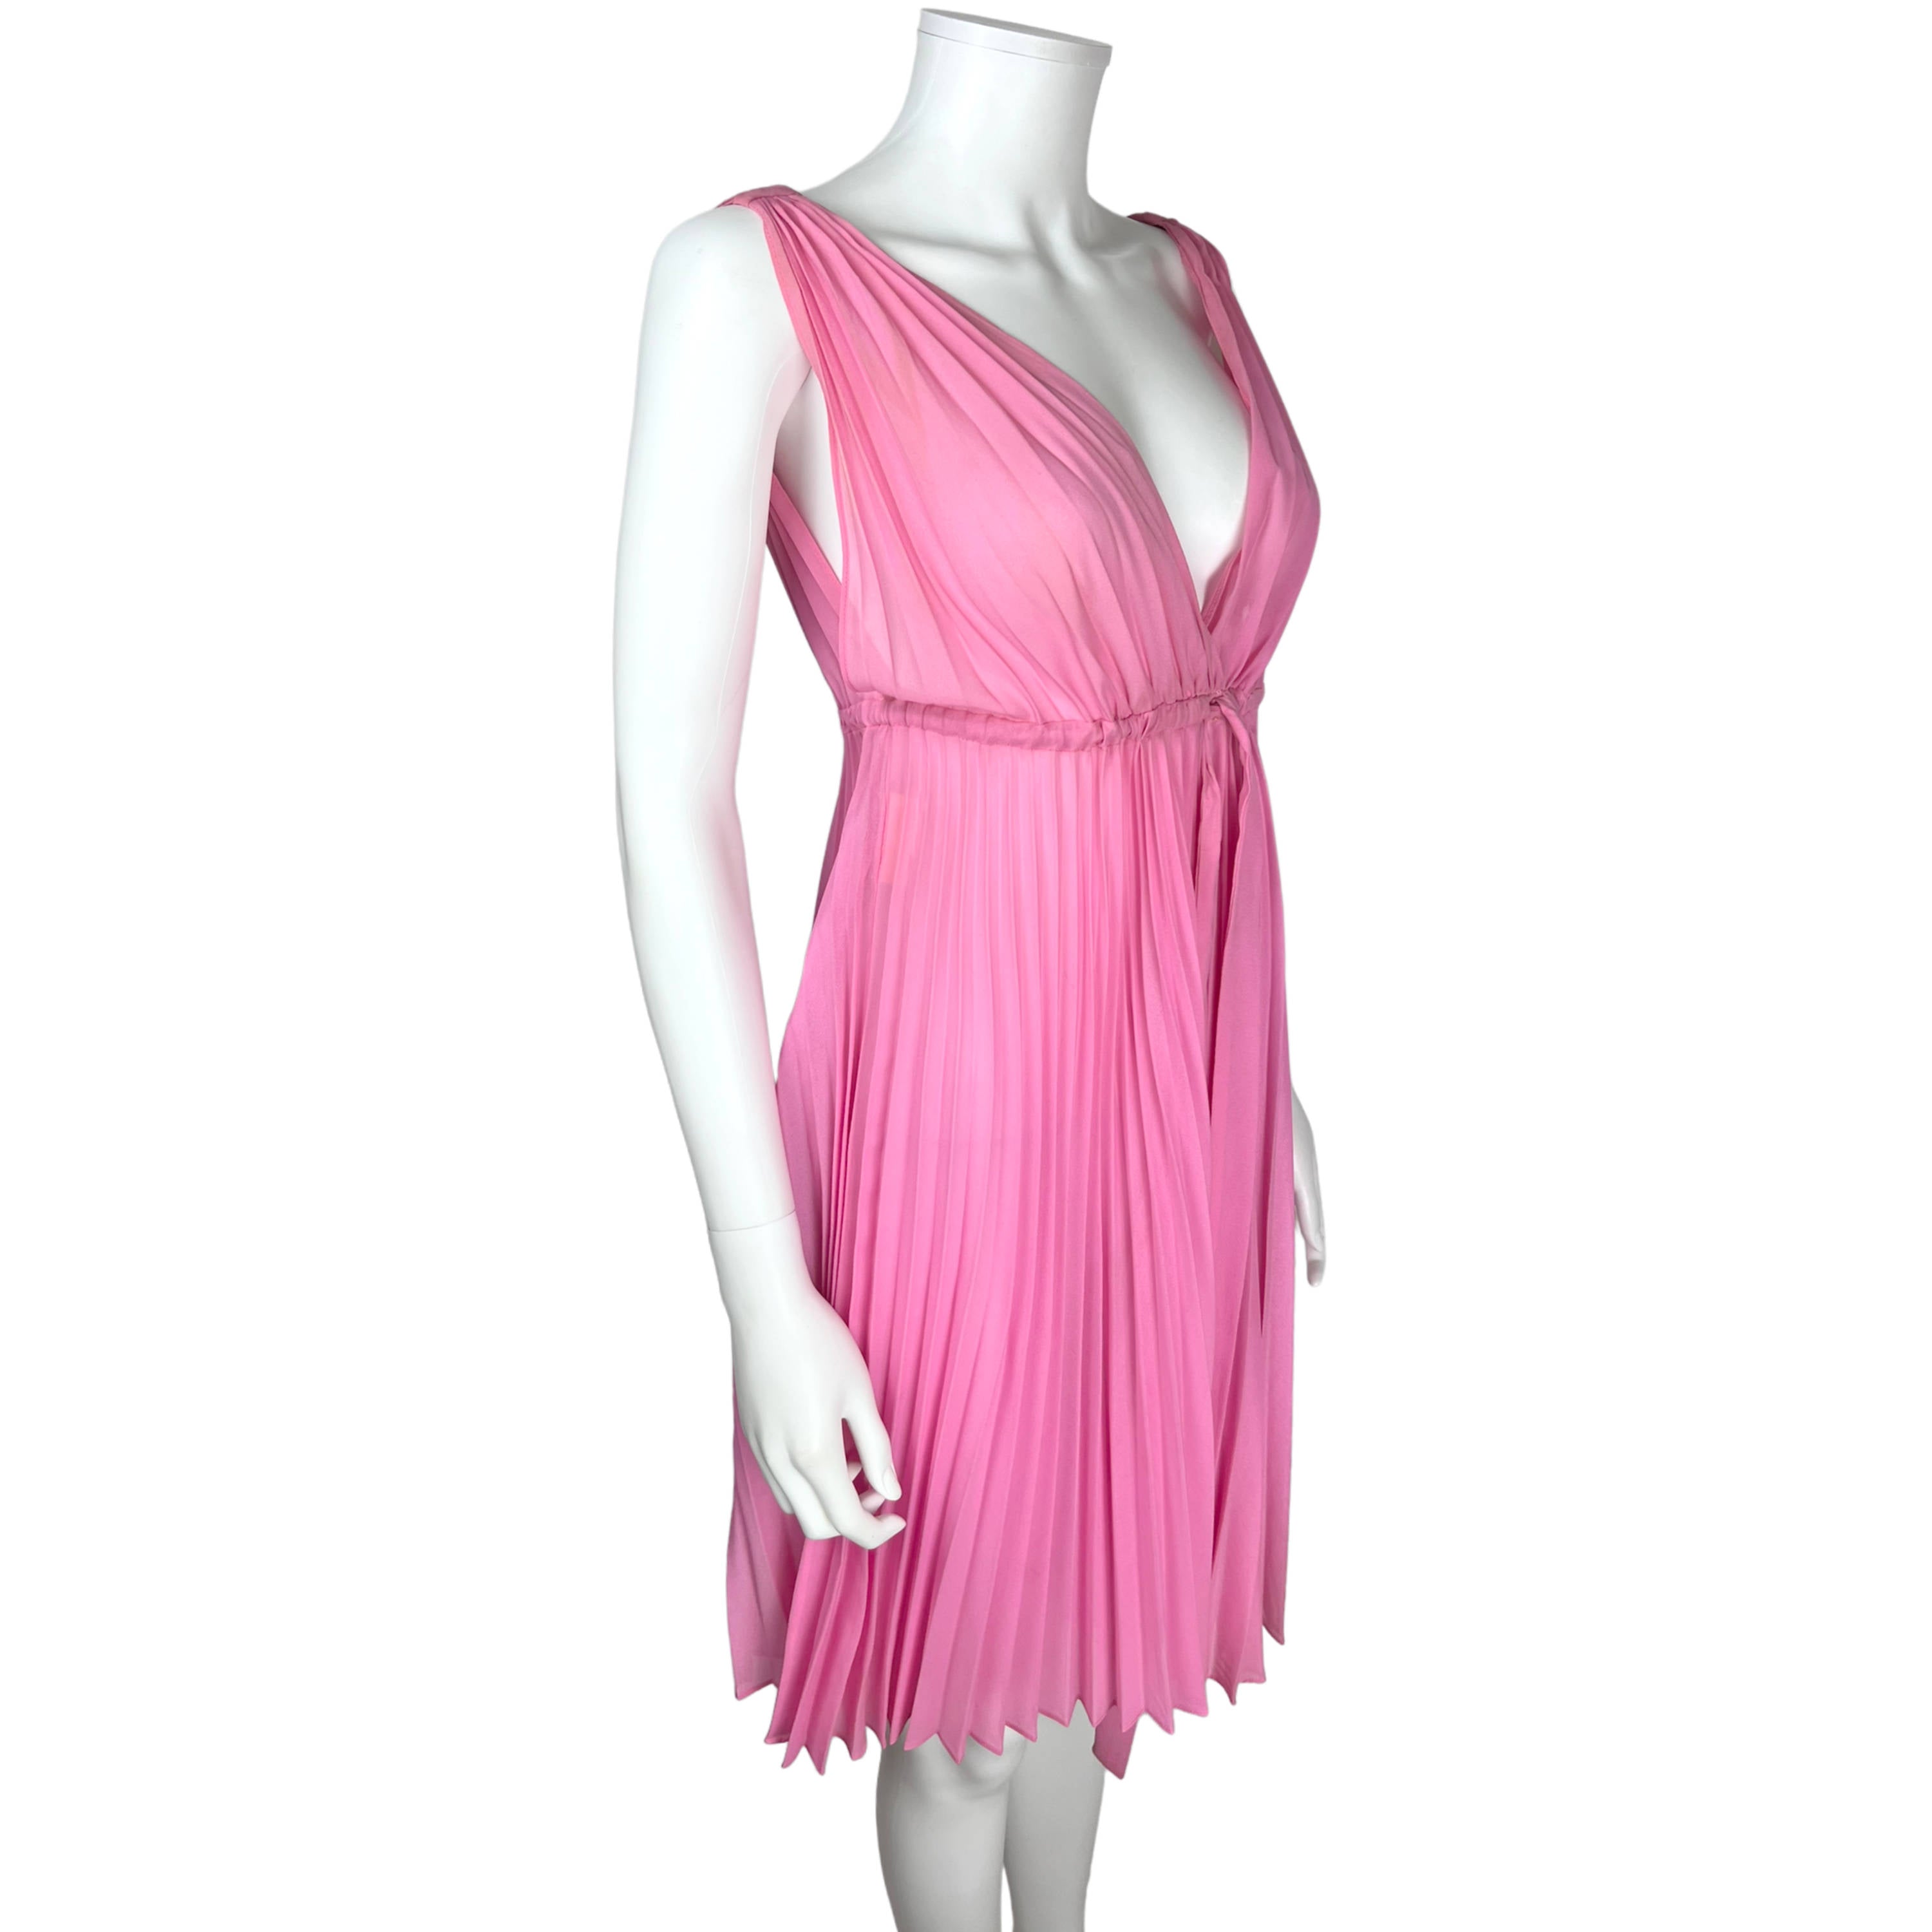 Vintage 1960s Shocking Pink Nylon Ruffled Nightgown with Matching ...